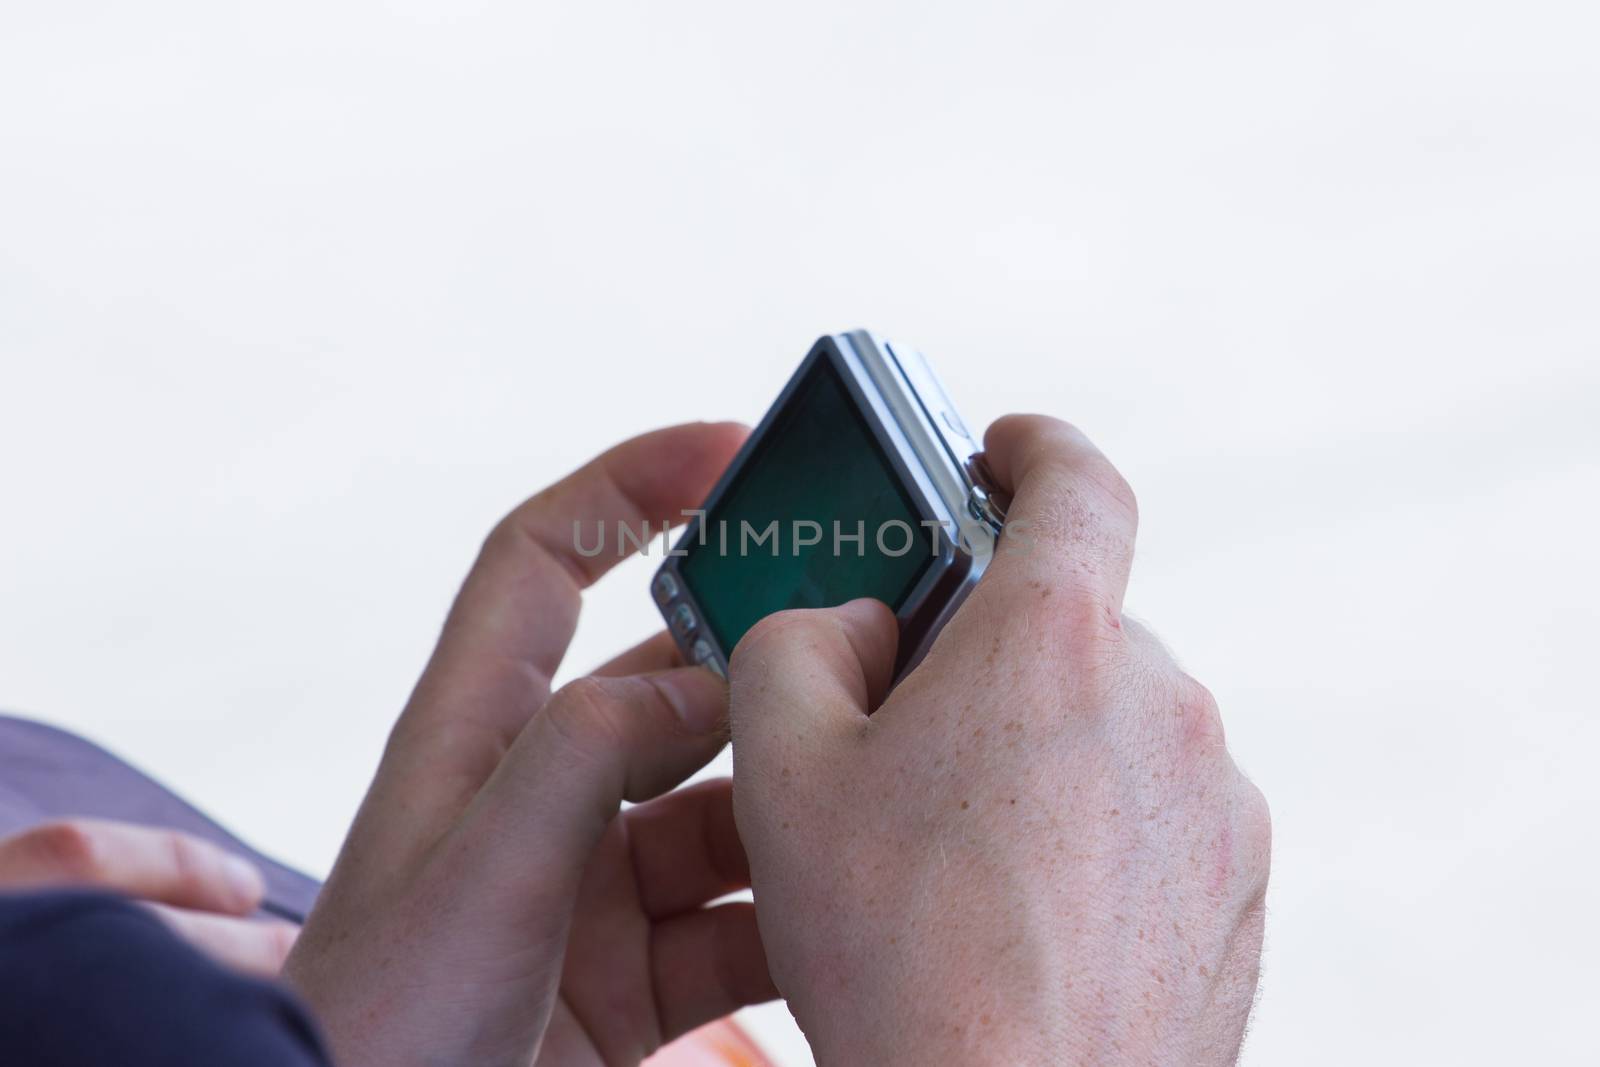 Closeup image of two hands holding black compact digital photo camera, isolated on white background